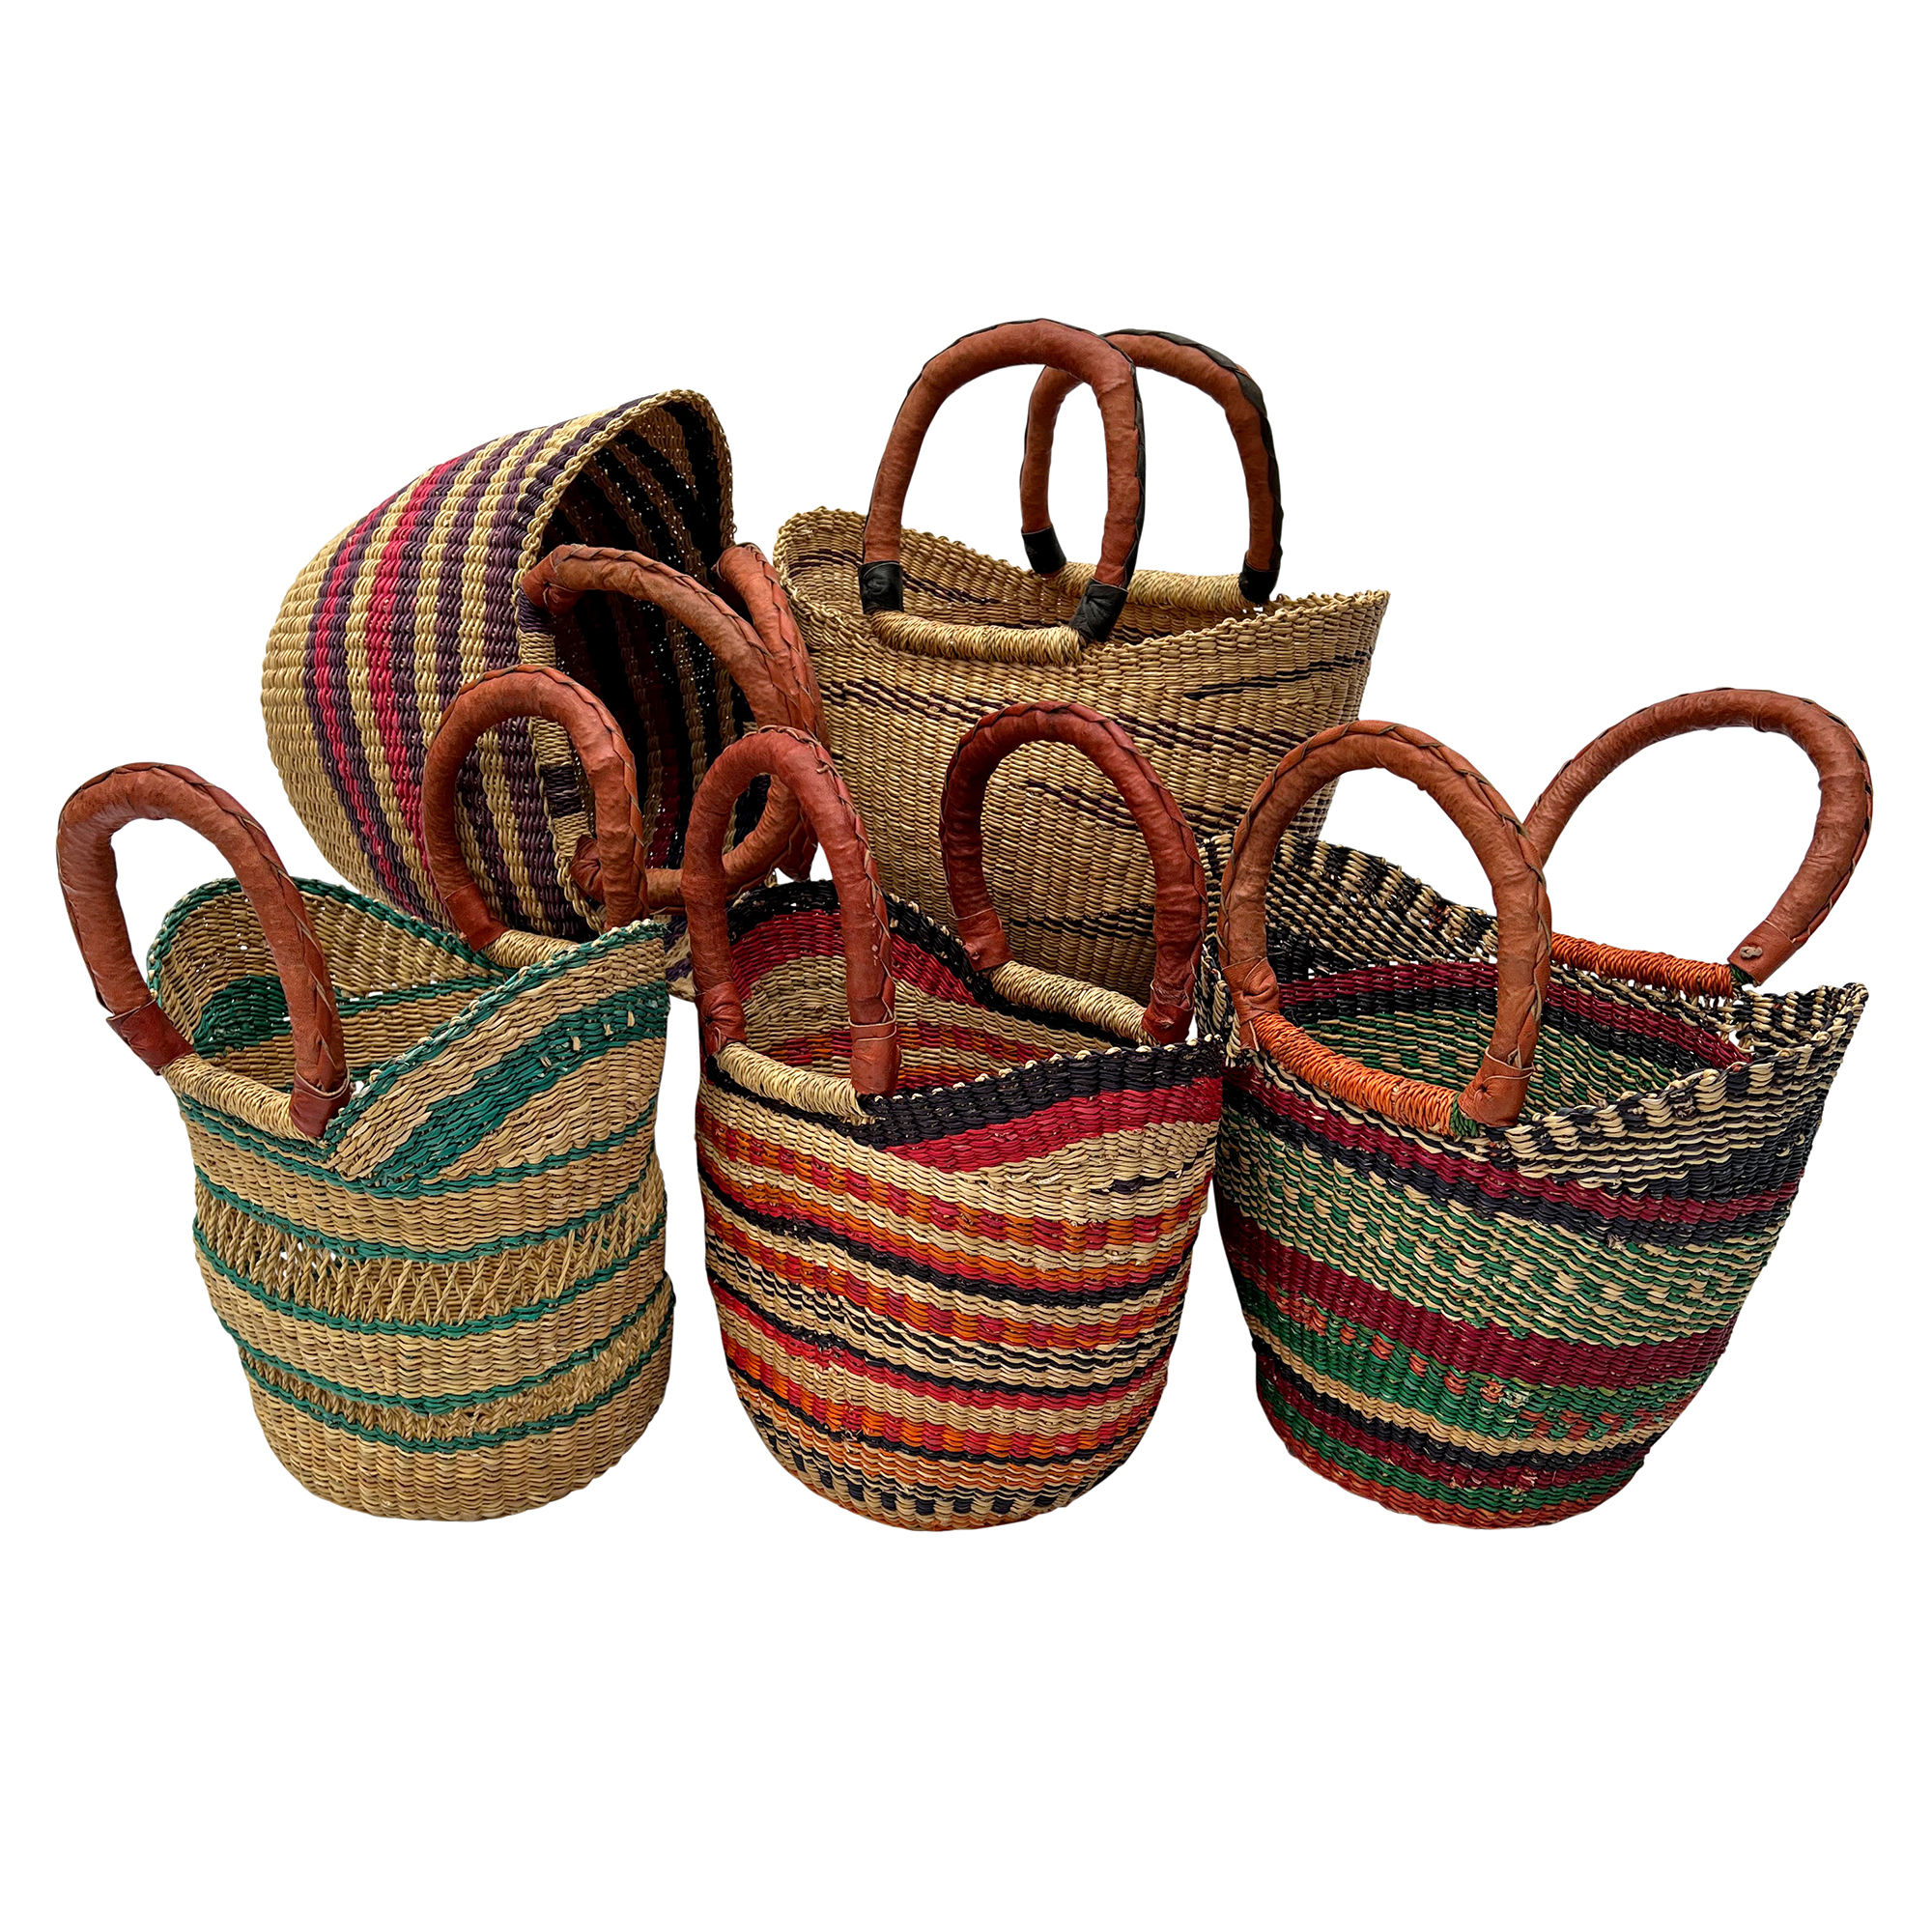 Deluxe Colorful African Shopping Baskets